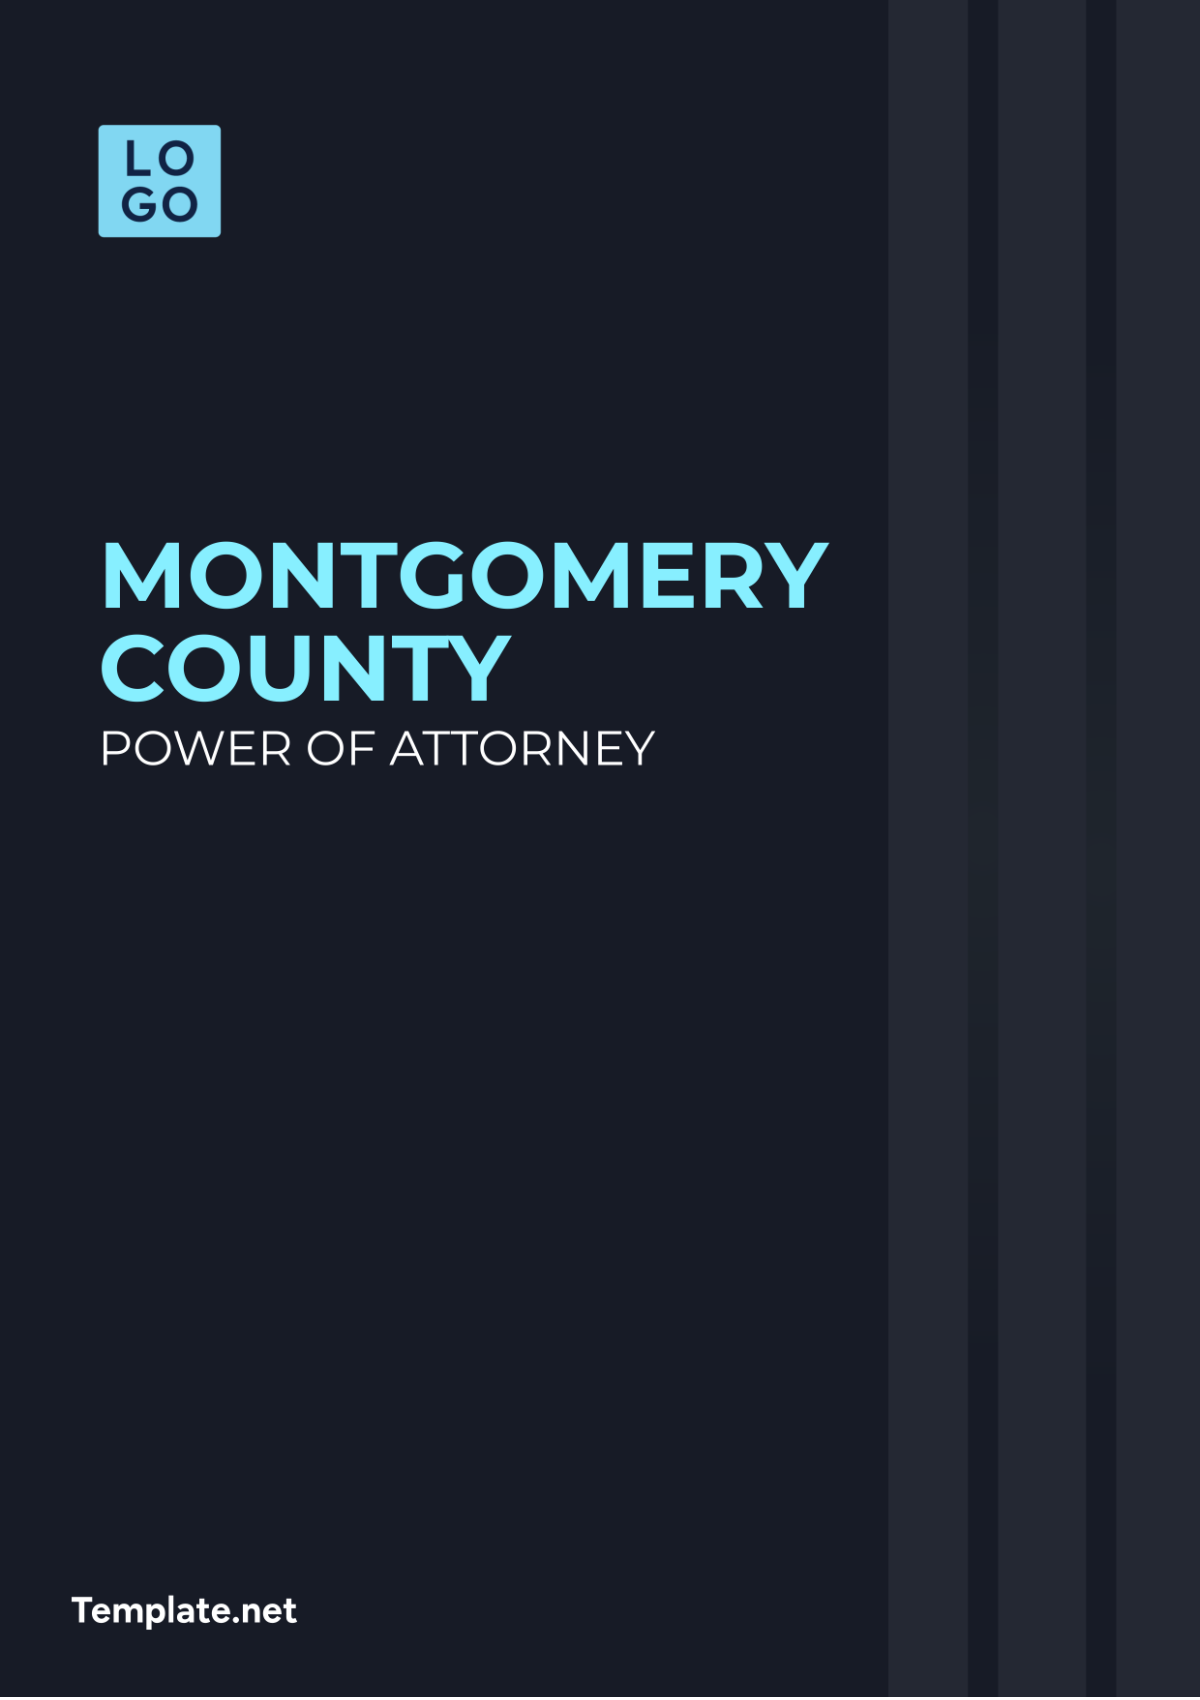 Montgomery County Power of Attorney Template